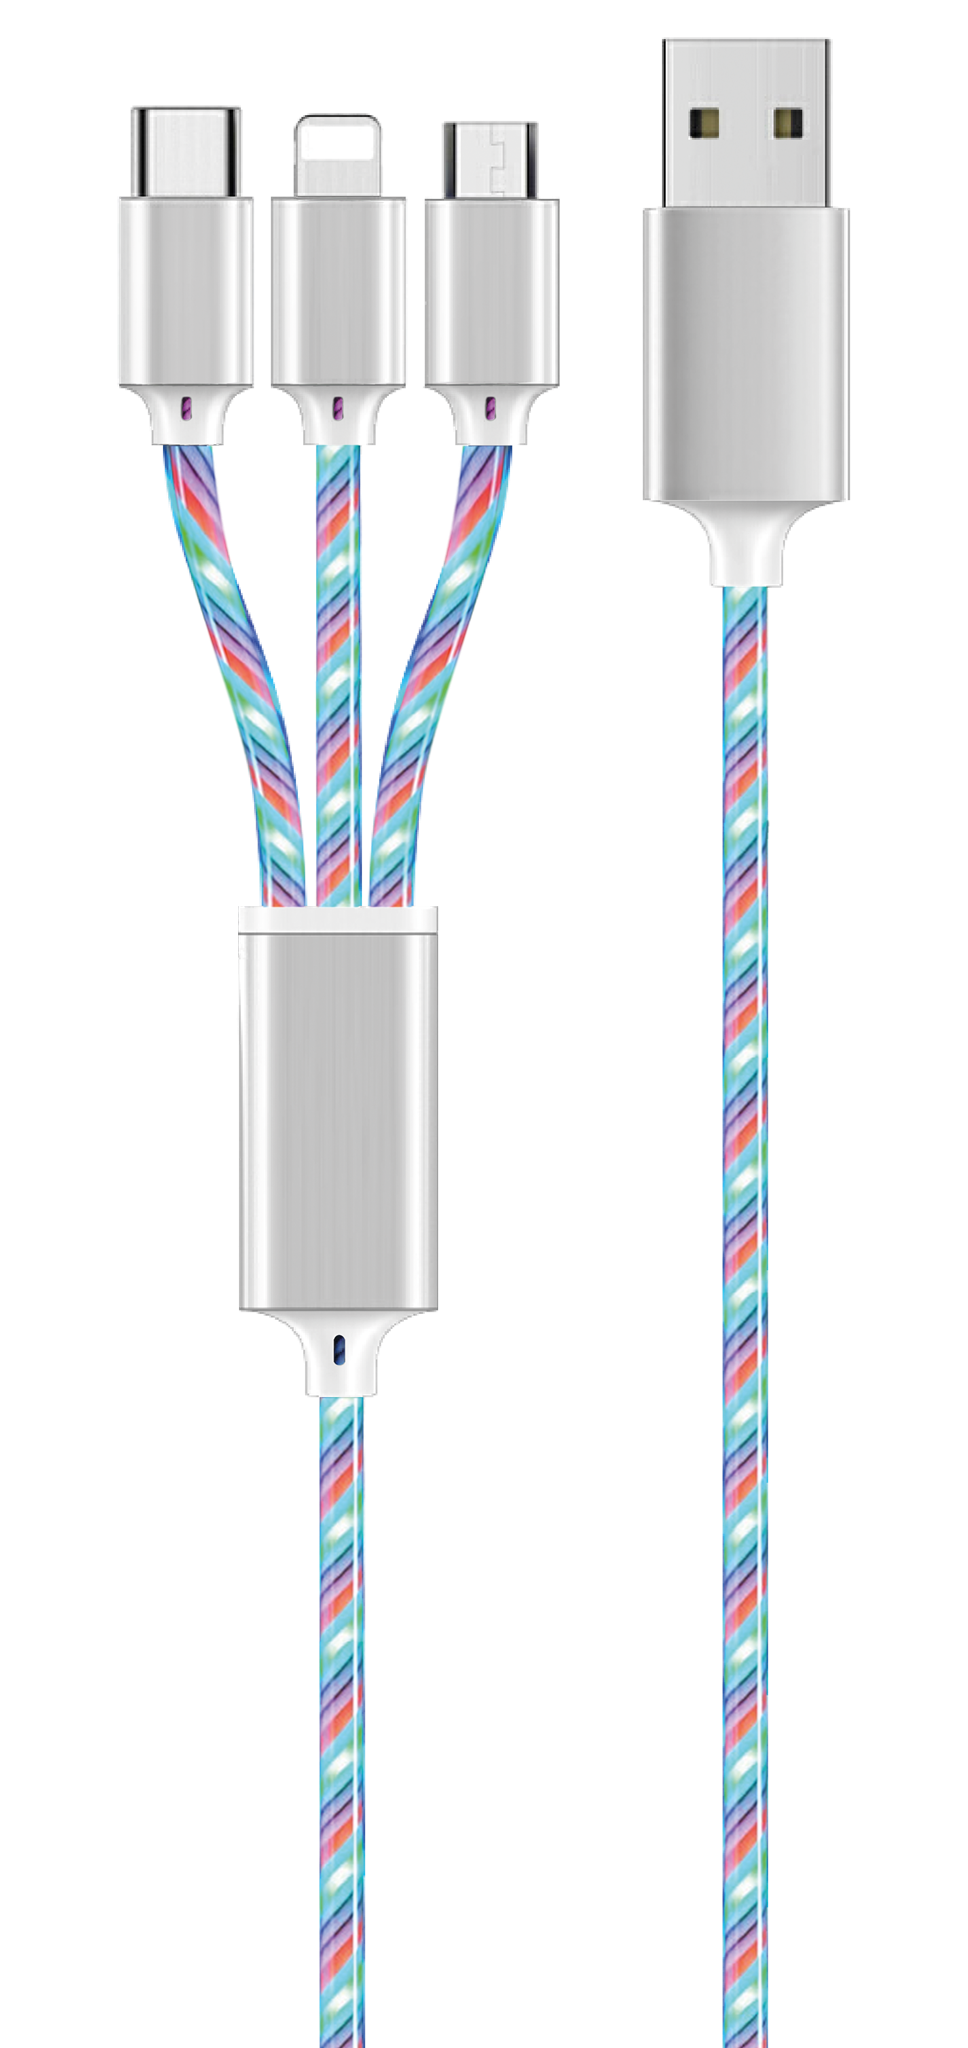 Picture of 3 in 1 USB LED Kabel - multicolor - 100cm